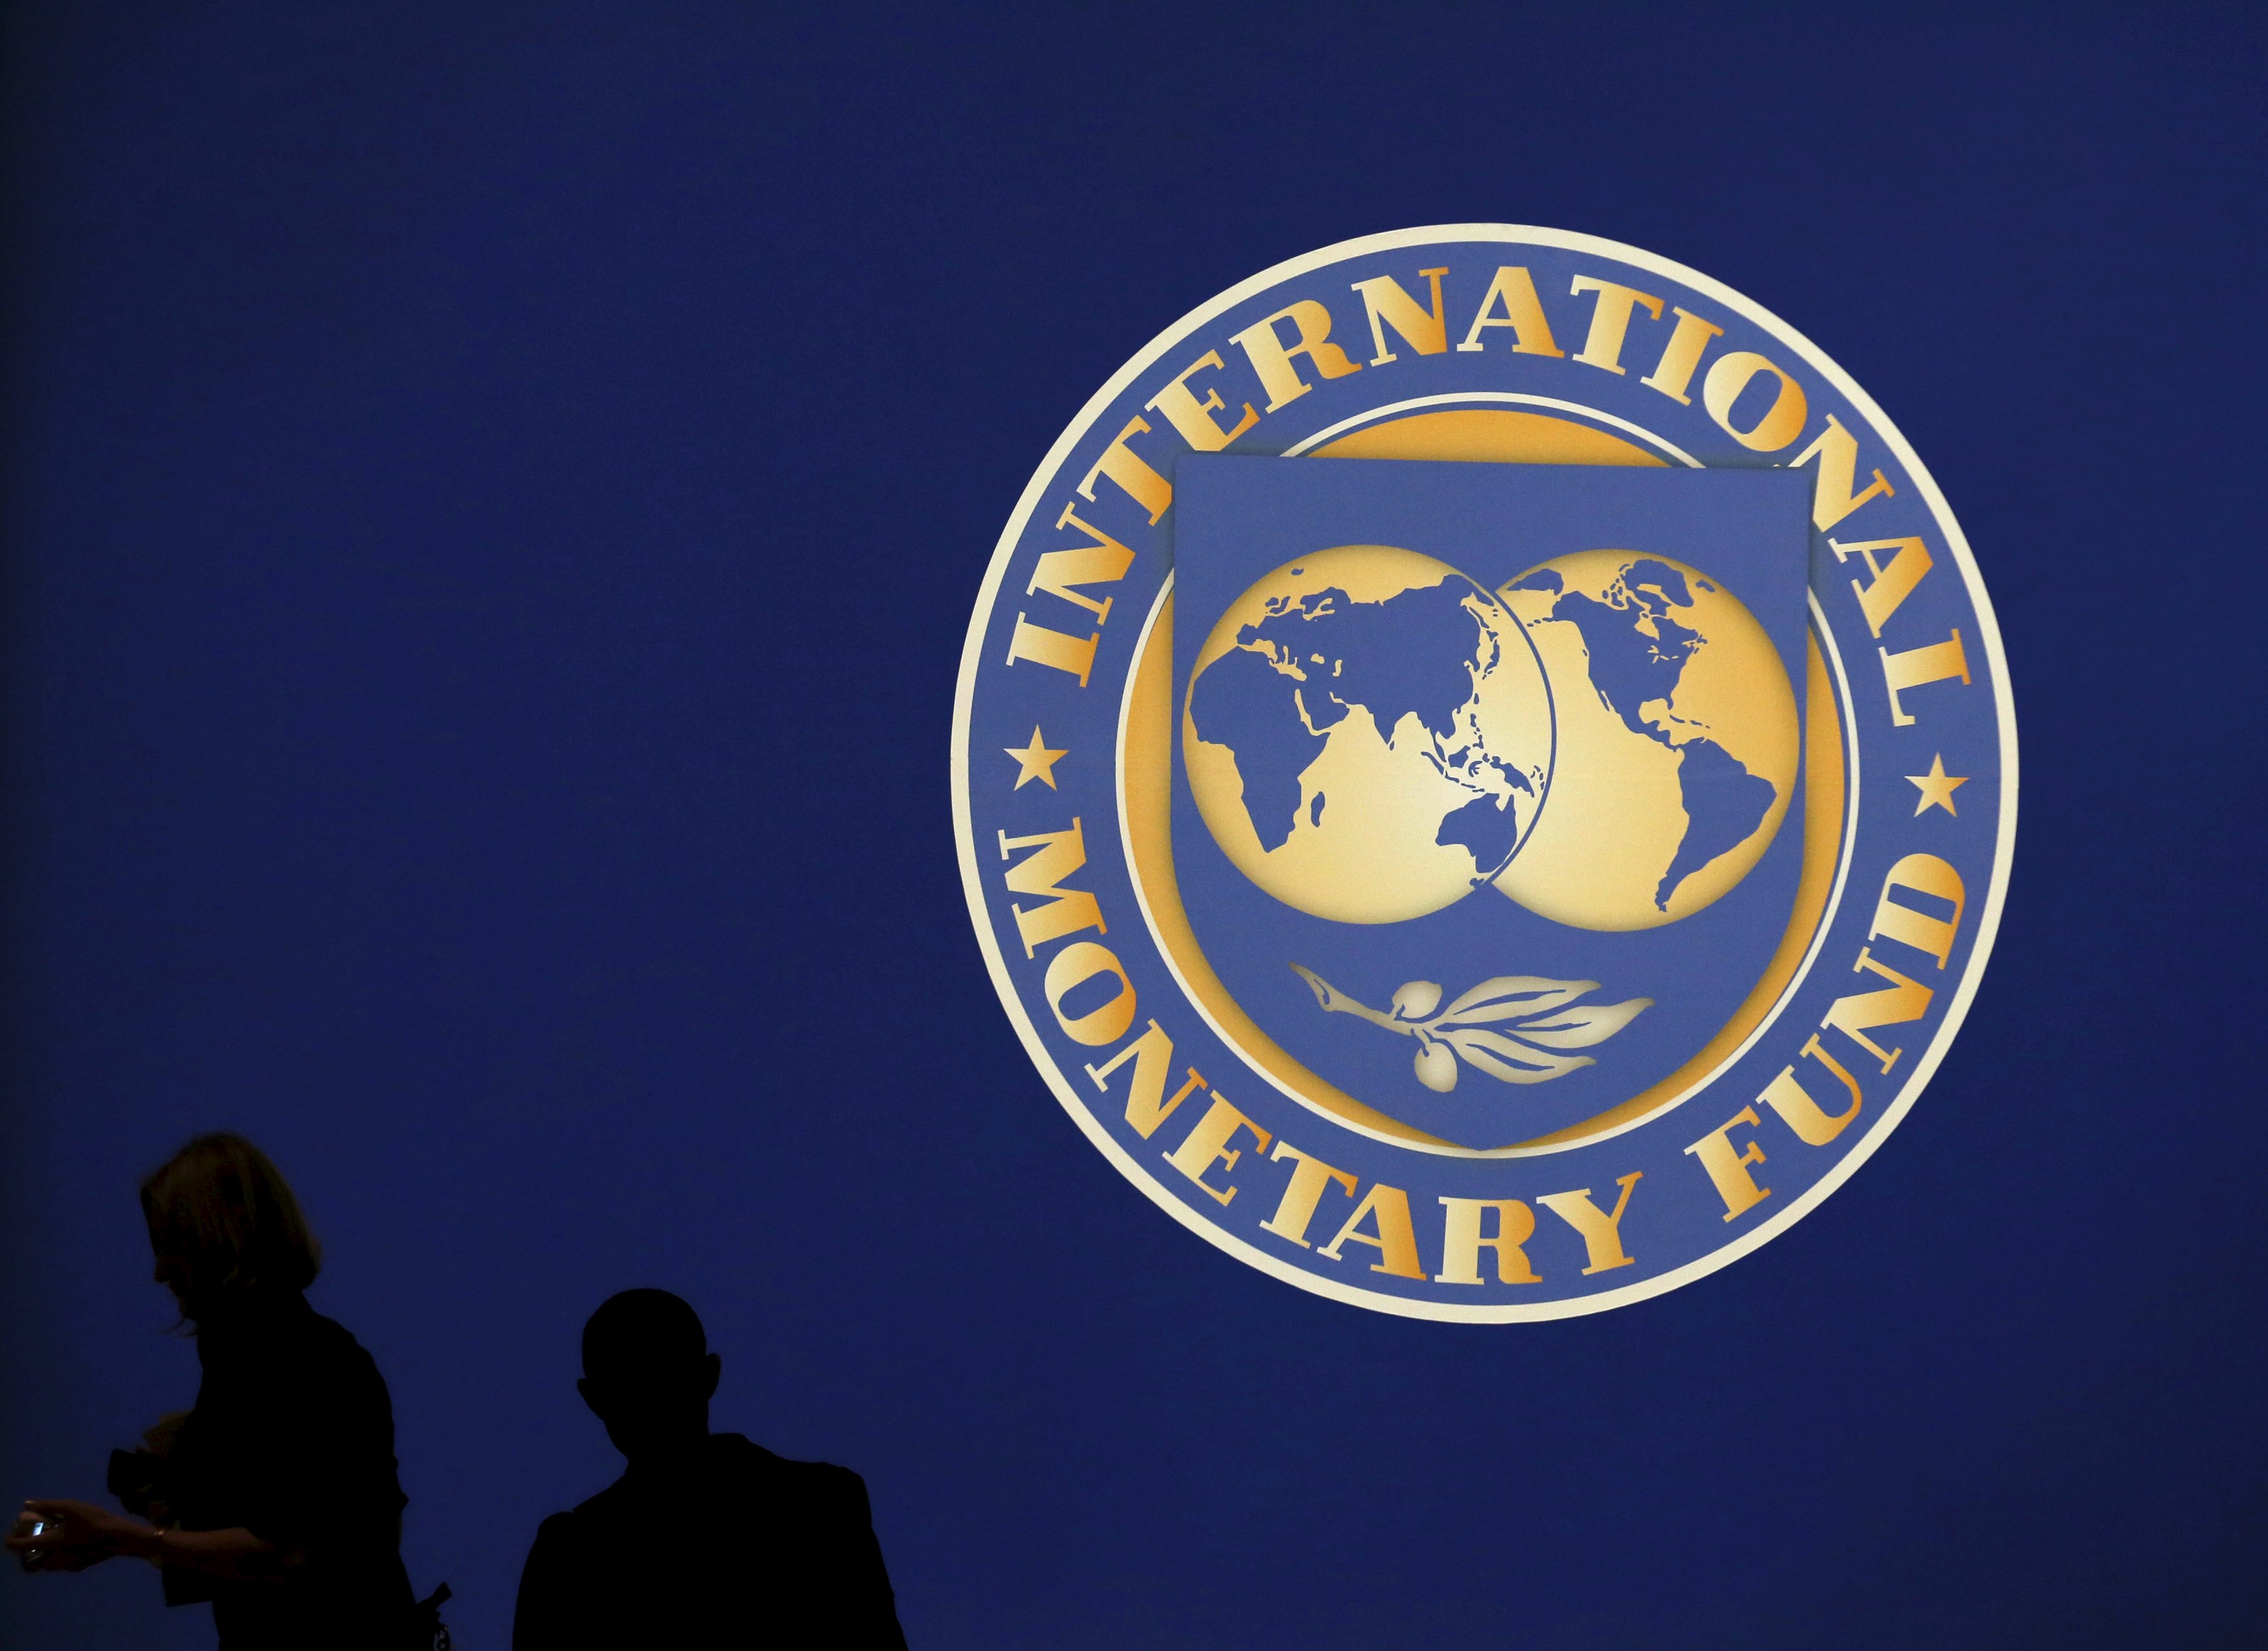 Visitors are silhouetted against the logo of the International Monetary Fund at the main venue for the IMF and World Bank annual meeting in Tokyo in this October 10, 2012 file photo. Even as the International Monetary Fund prepares to accept China's yuan in its basket of reserve currencies, a major diplomatic victory for Beijing's campaign to internationalise the currency, foreign companies are growing more sceptical. Thanks to recent reforms in China and the endorsement of key European governments, including Britain during a visit by President Xi Jinping last month, the yuan looks increasingly likely to find its way into the IMF reserve basket, known as Strategic Drawing Rights (SDR). REUTERS/Kim Kyung-Hoon/Files